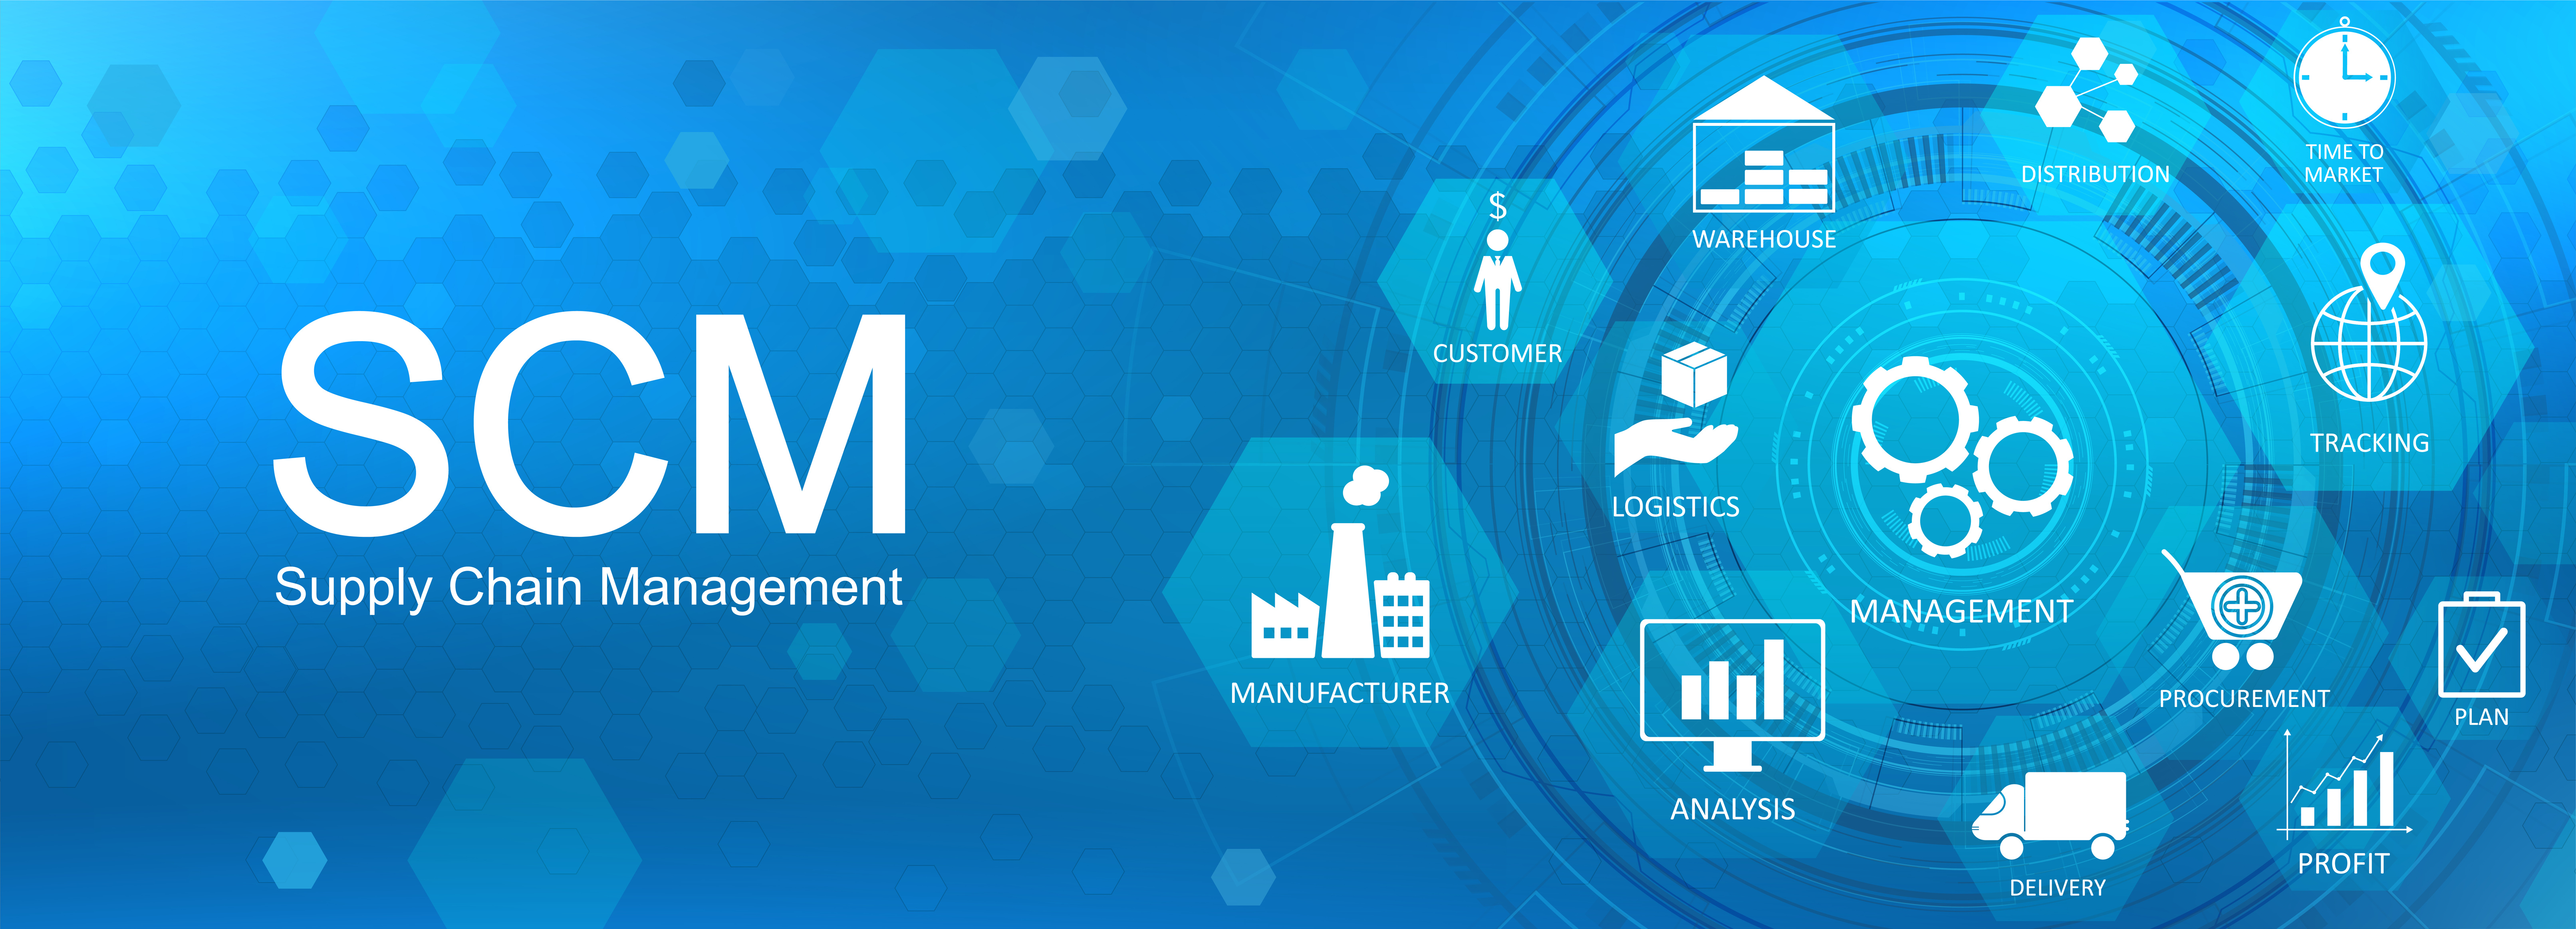 What is Supply Chain Management Software?